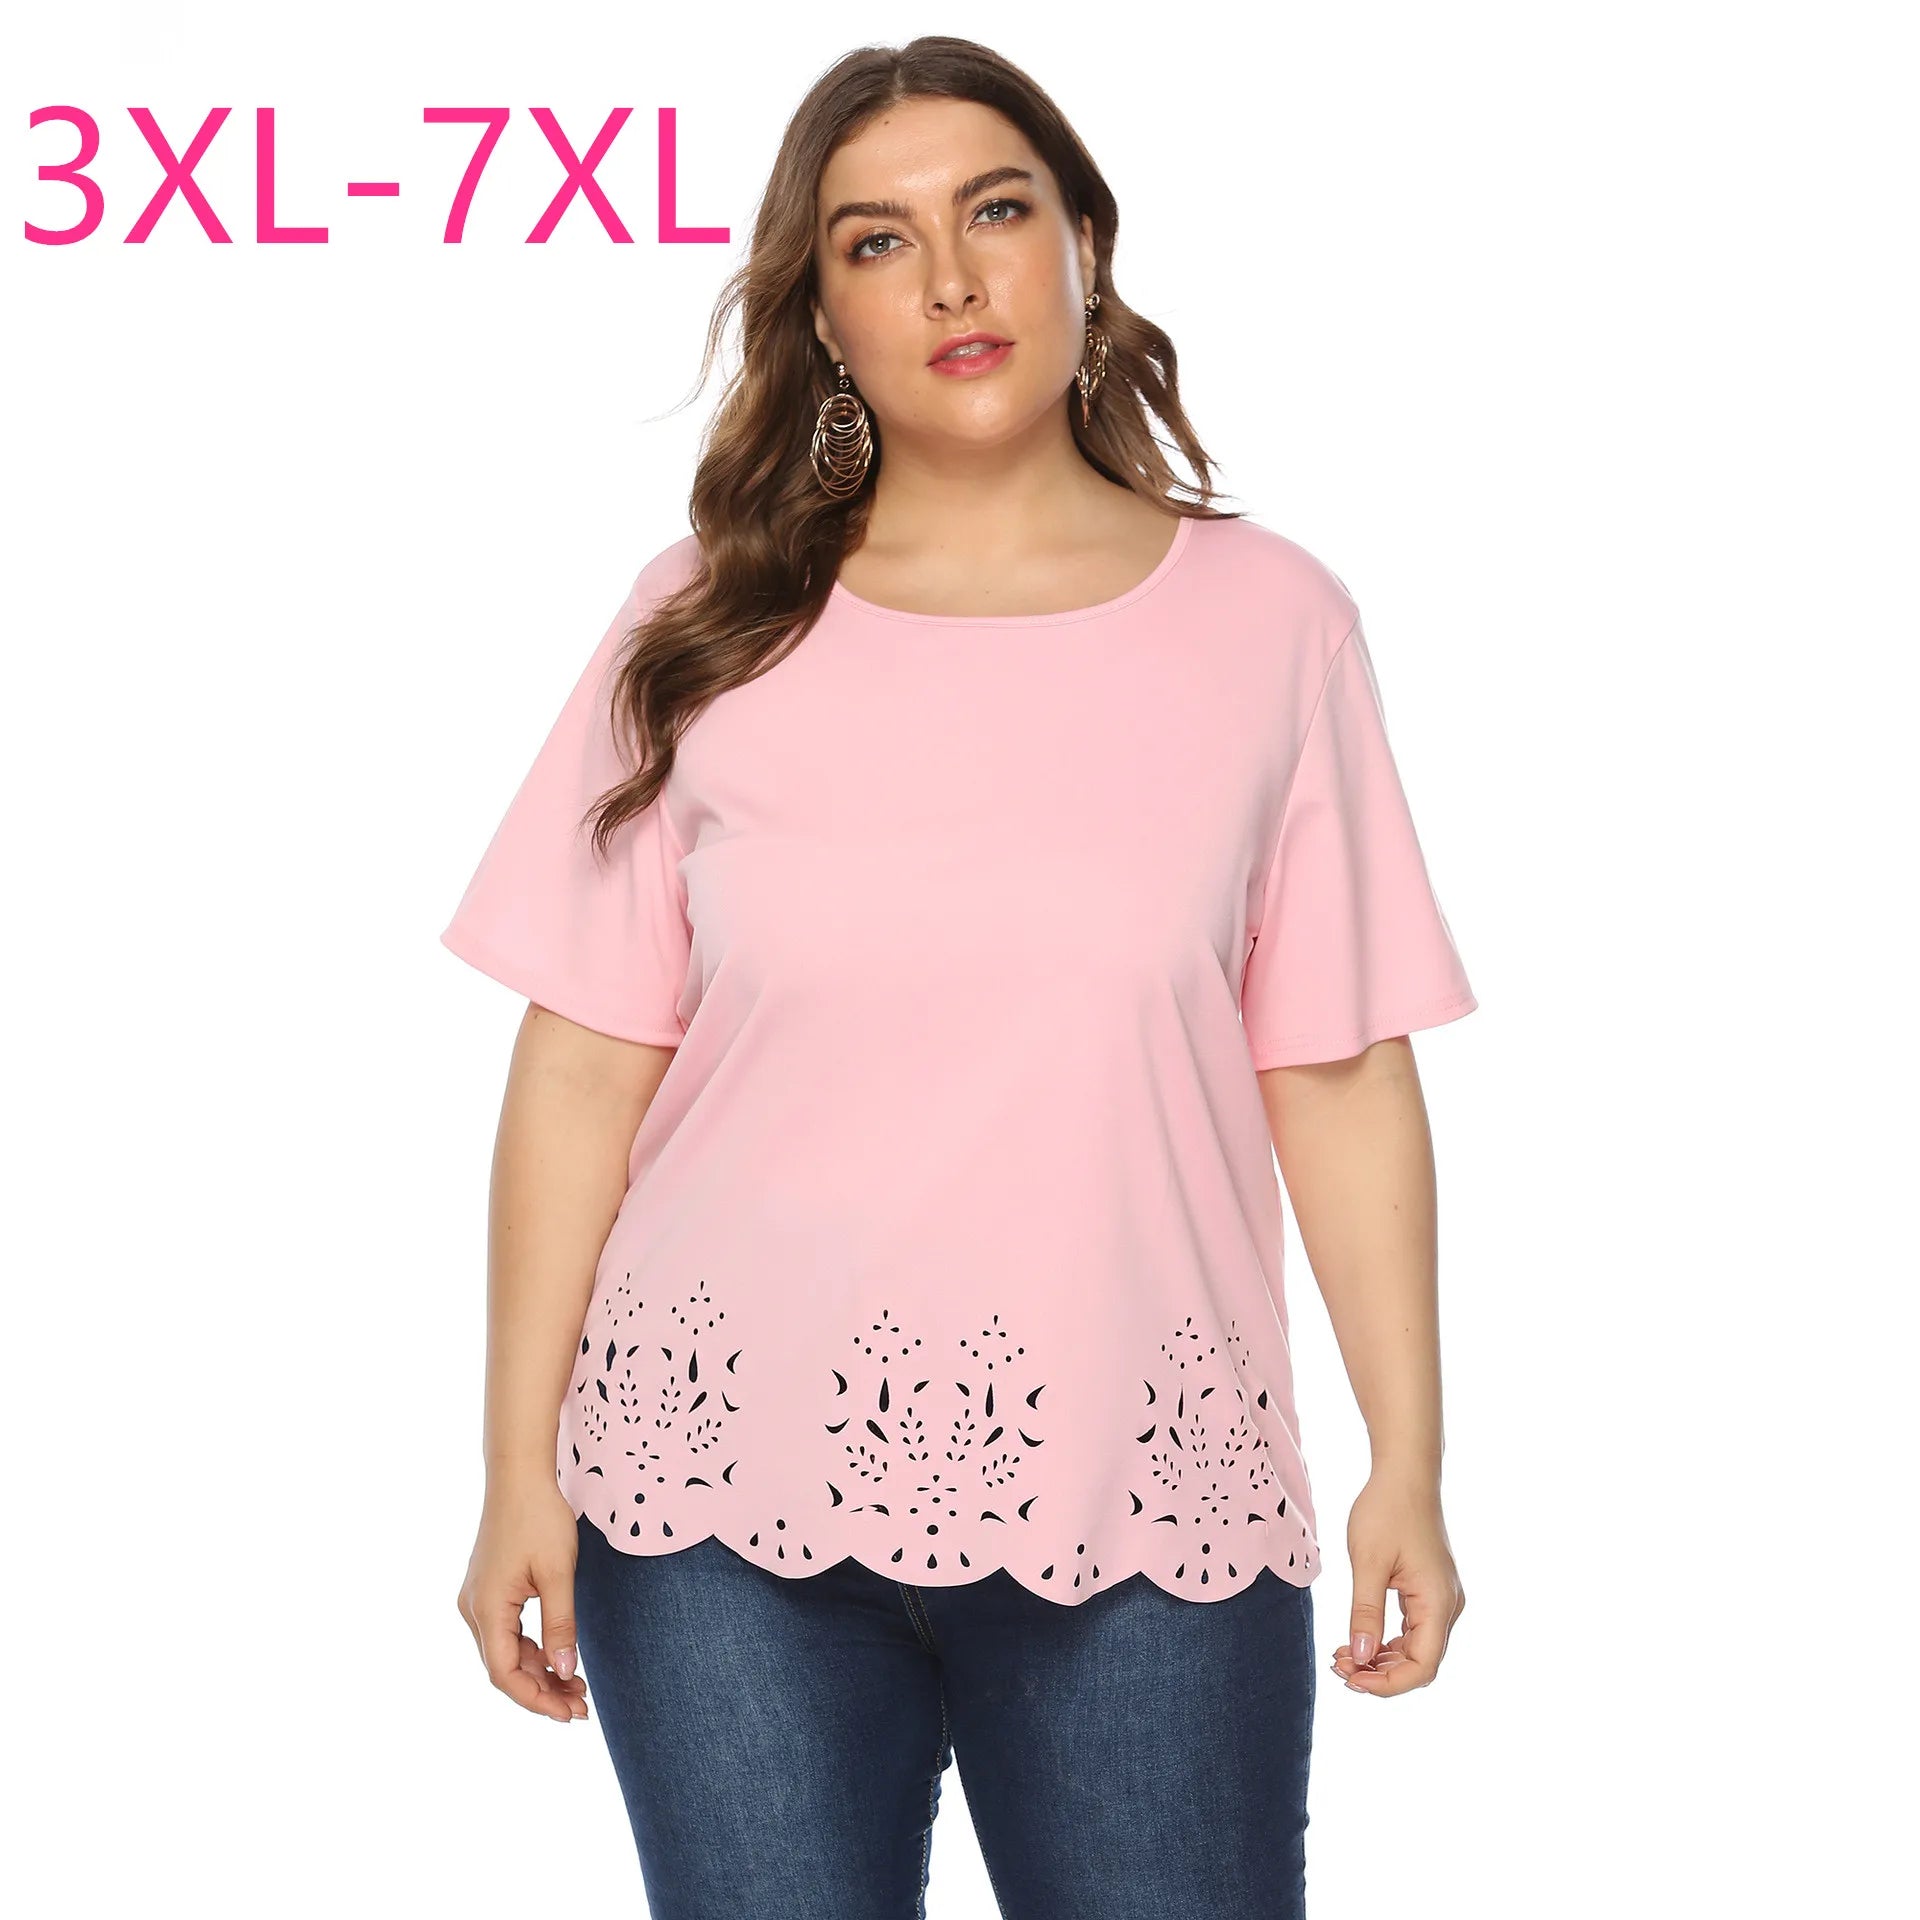 2021 Summer Plus Size Tops For Women Large Short Sleeve Loose Hollow Out Pink O-neck T-shirt 3XL 4XL 5XL 6XL